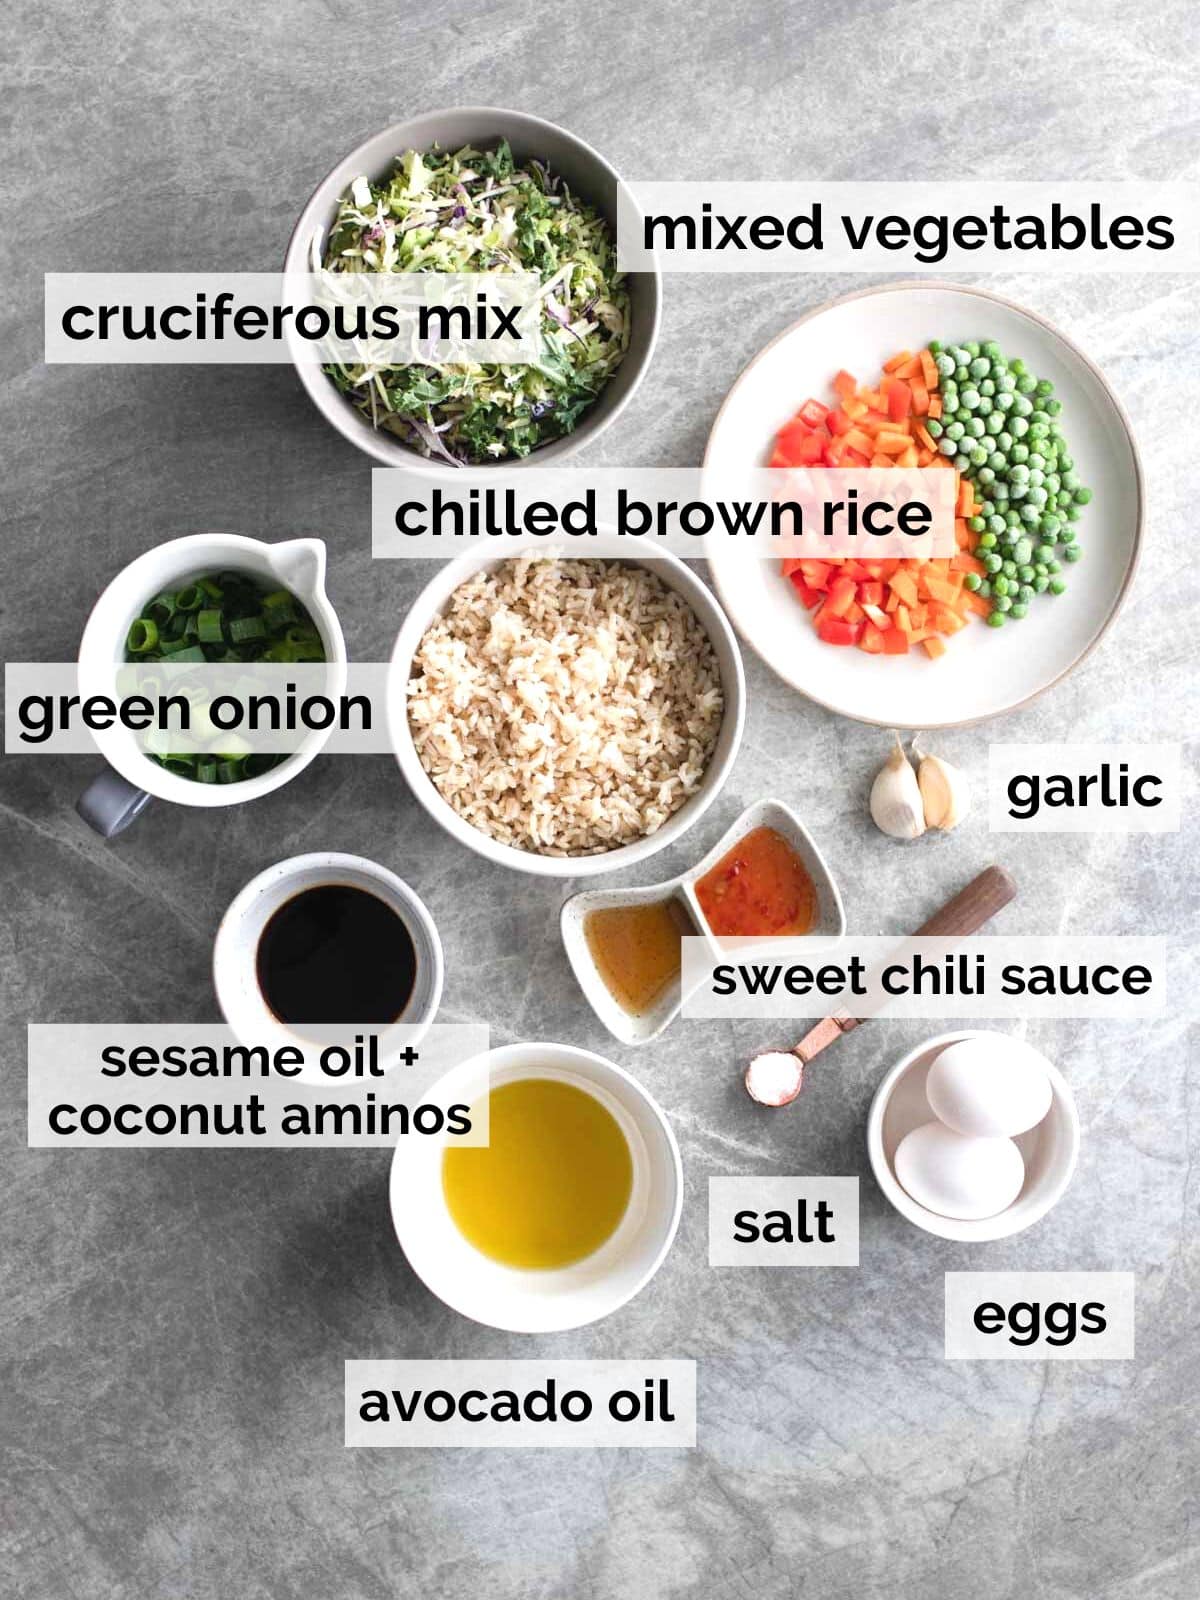 Ingredients for fried rice on a table.